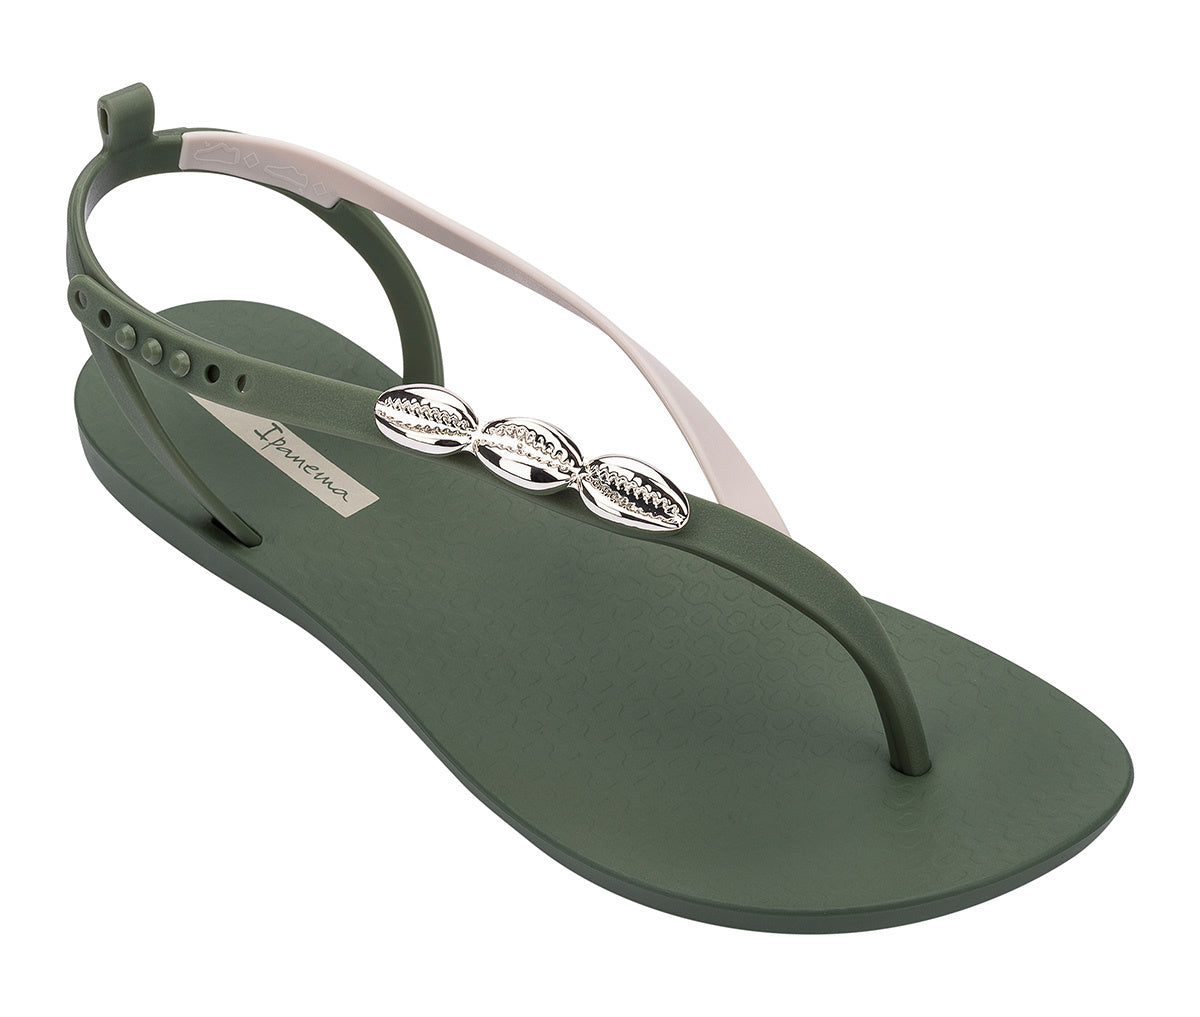 Angled view of a green Ipanema Salty women's sandal with 3 silver shells on the strap.